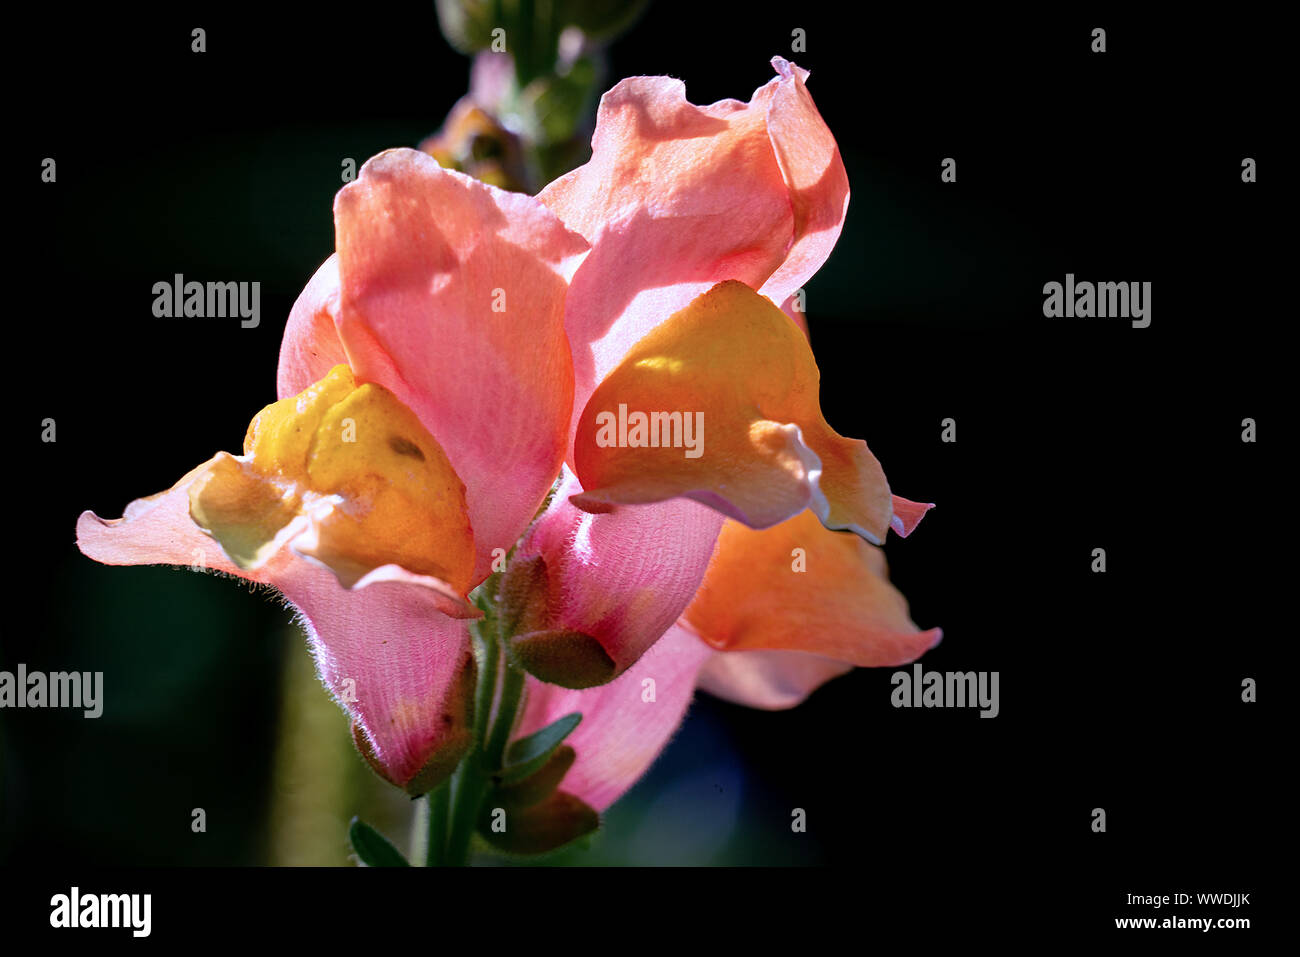 Colourful macro shot of orange and pink  snapdragon (Antirrhinum majus) flowers in bright sunshine with a black background Stock Photo